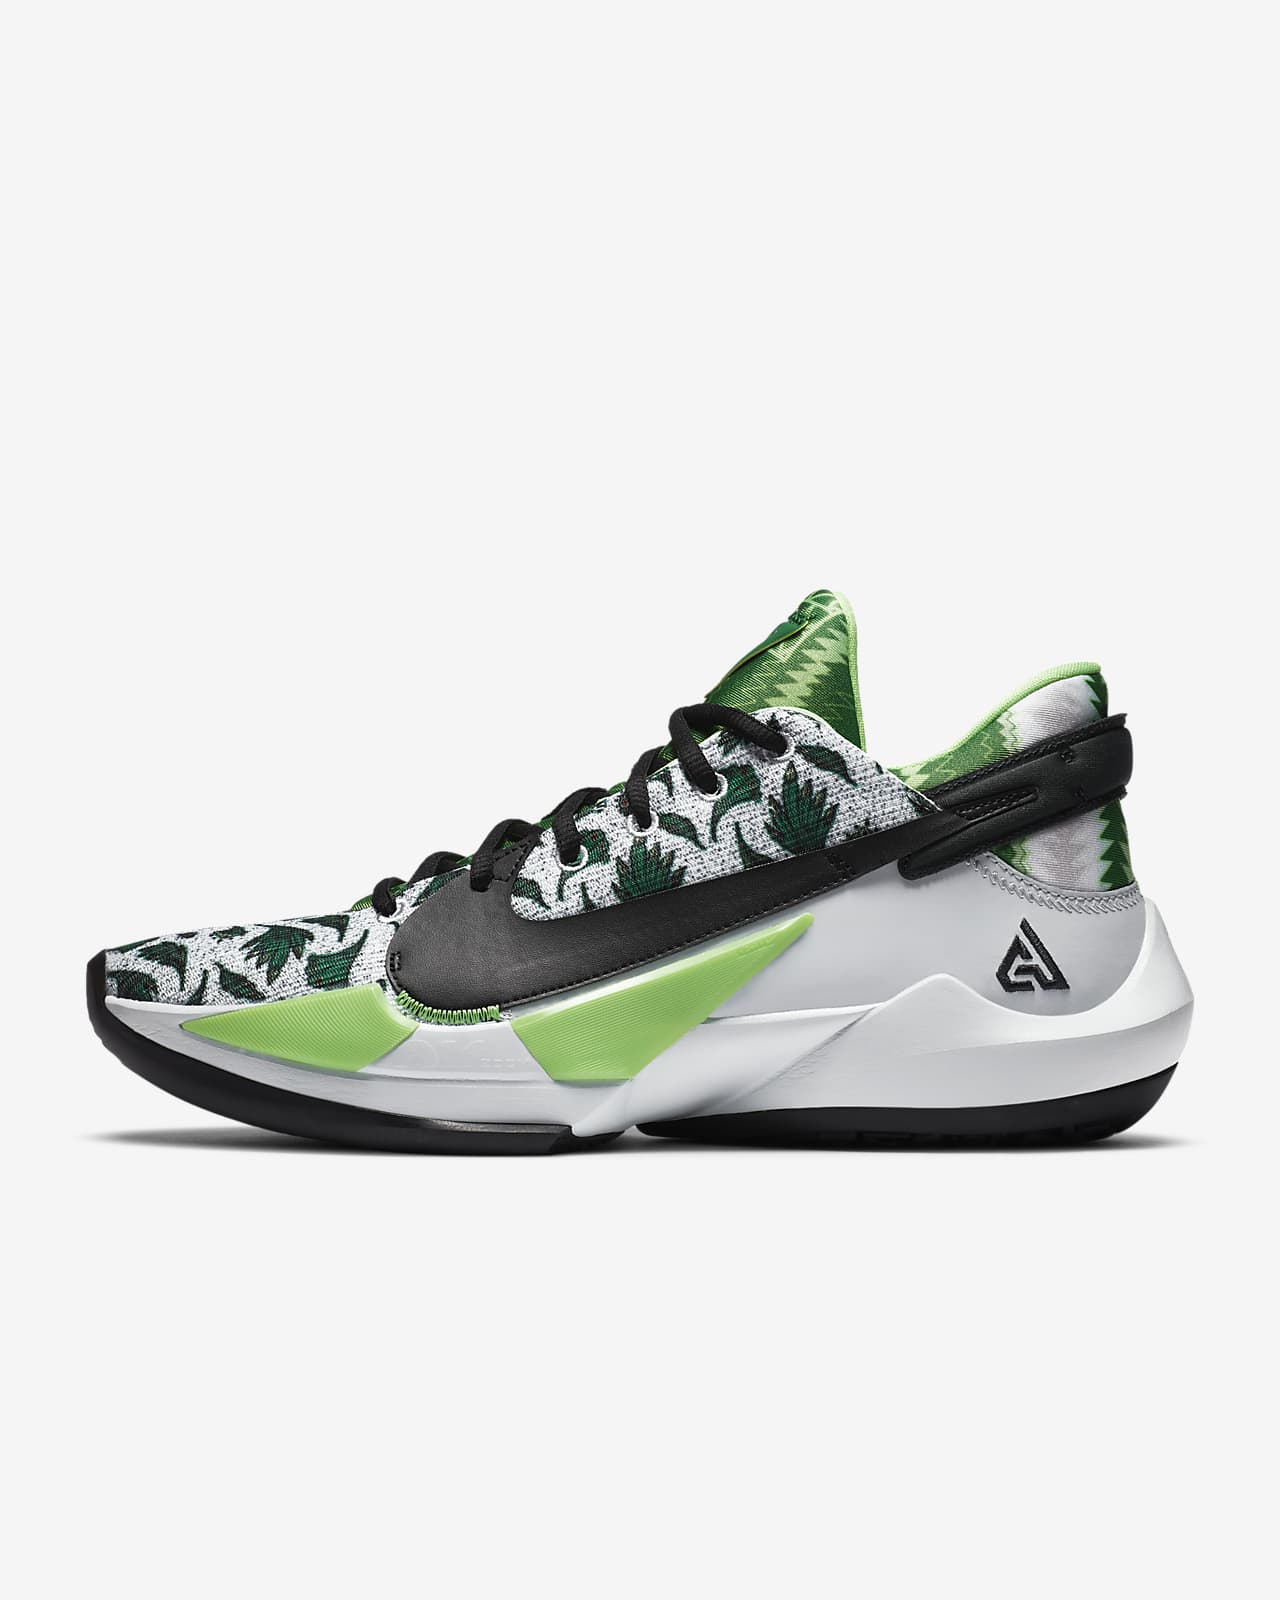 giannis new shoes